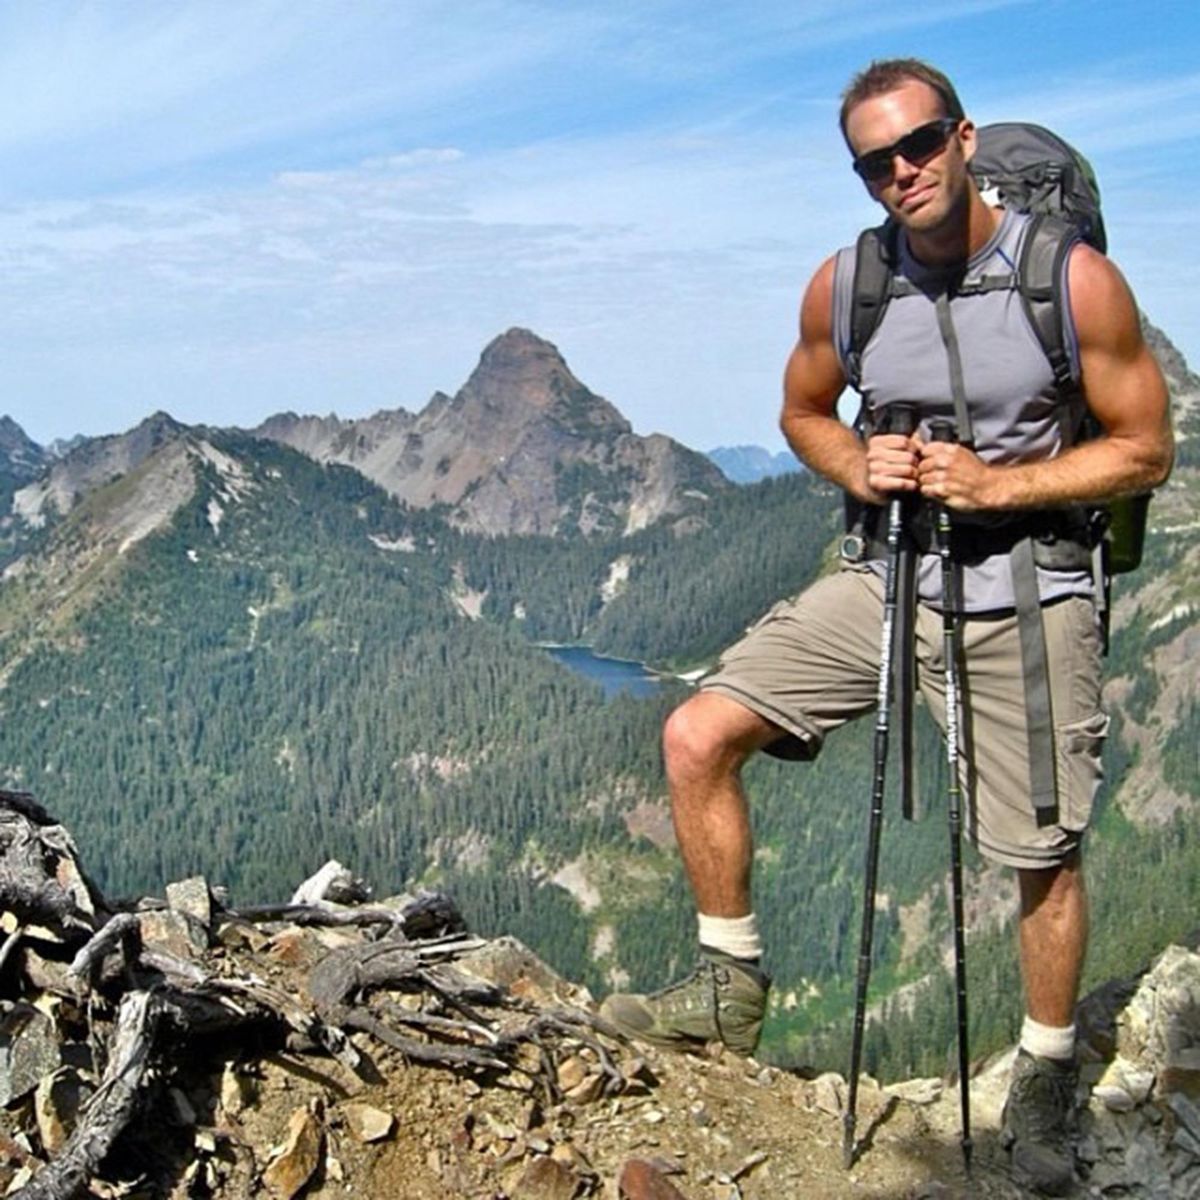 Before a virus damaged his heart, Jeremy White was an avid hiker, climber and adventurer. (COURTESY OF JEREMY WHITE / COURTESY OF JEREMY WHITE)